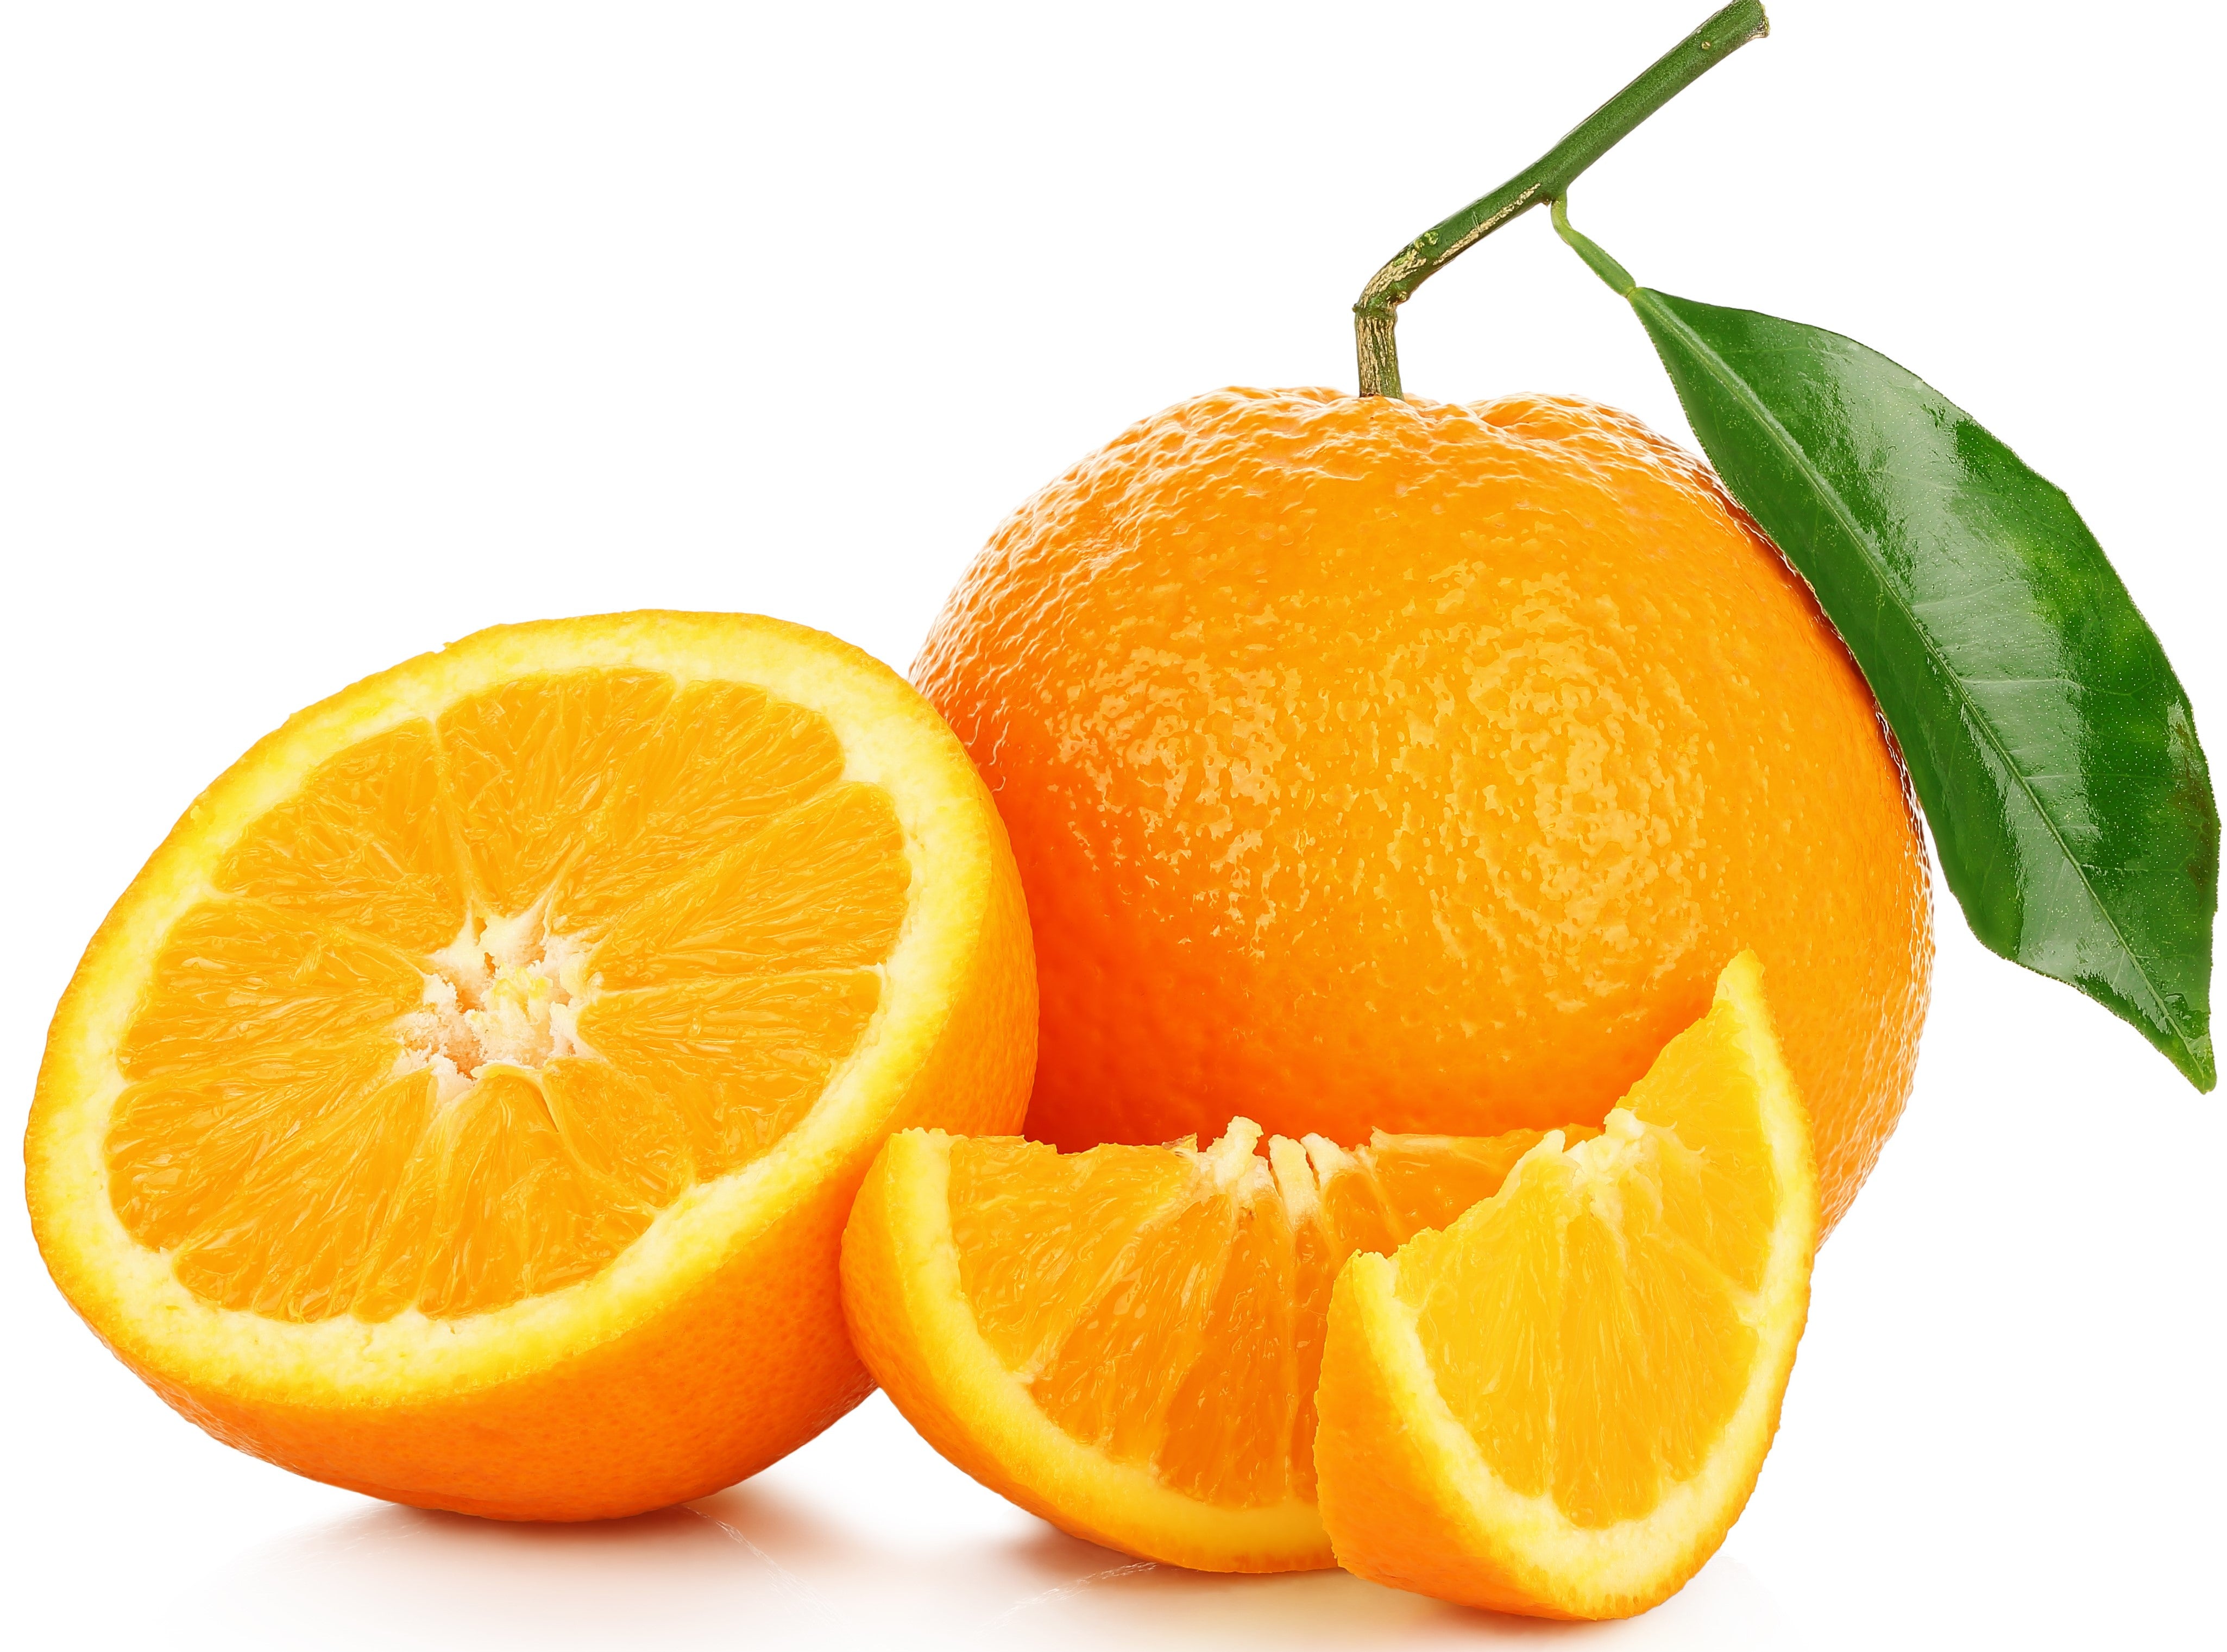 heal chapped and dry lips due to citrus allergy